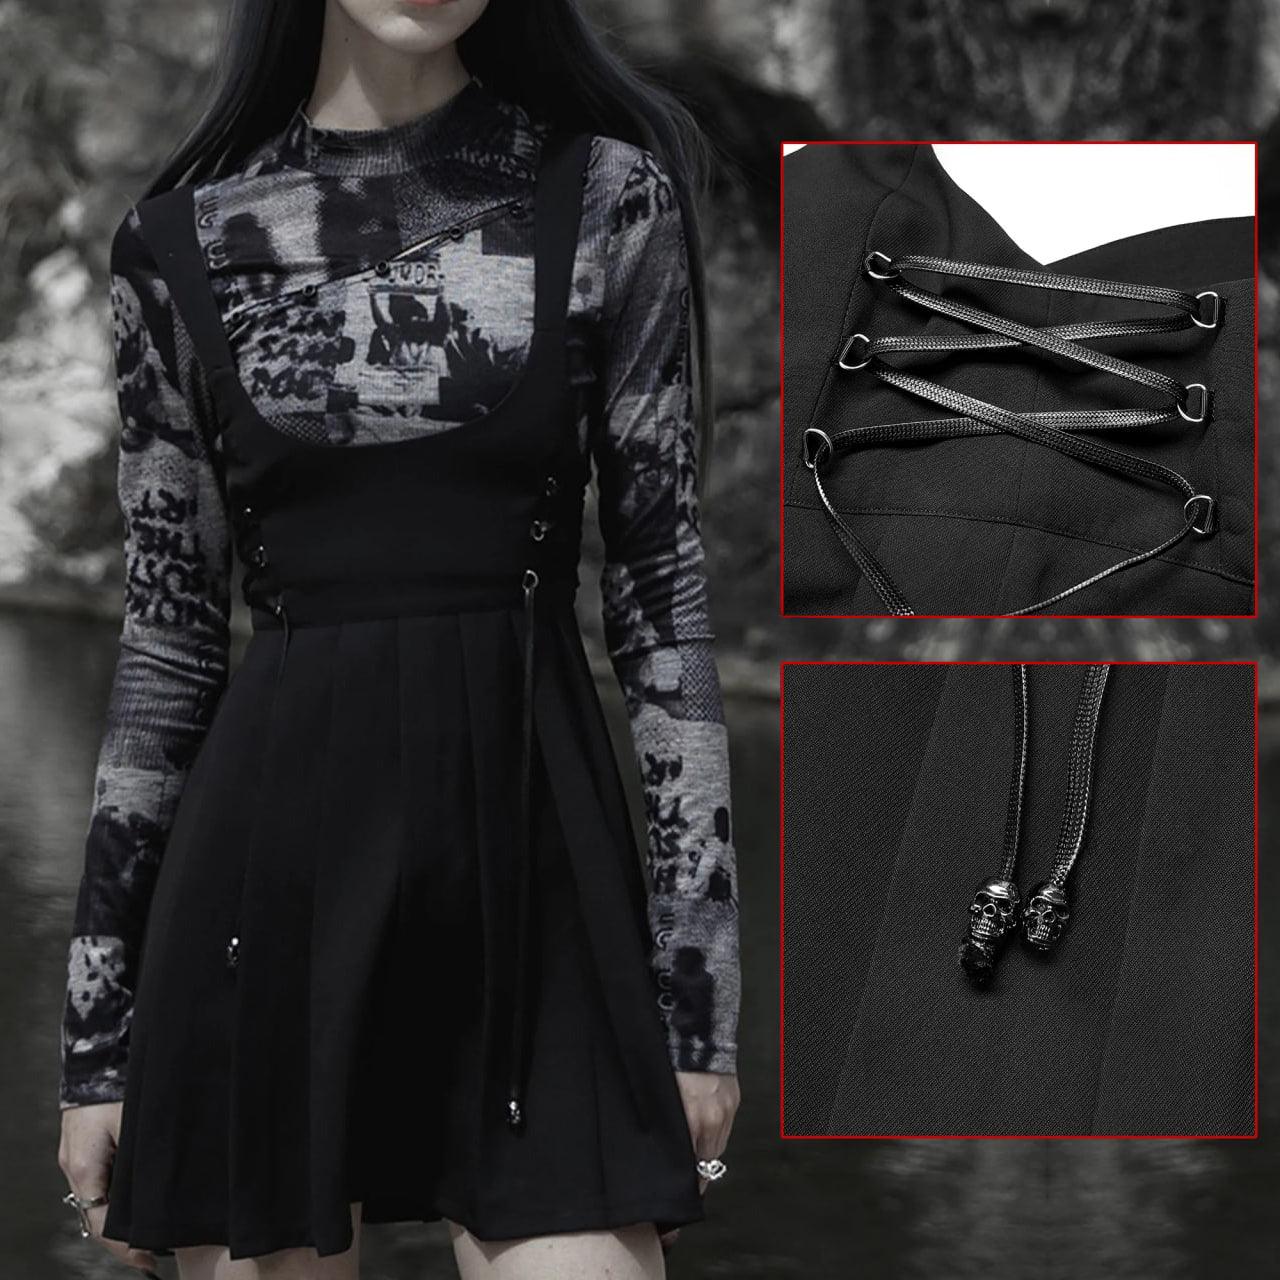 Punk Gothic Dress, Attractive Sleeveless Clothes For Women - Wonder Skull